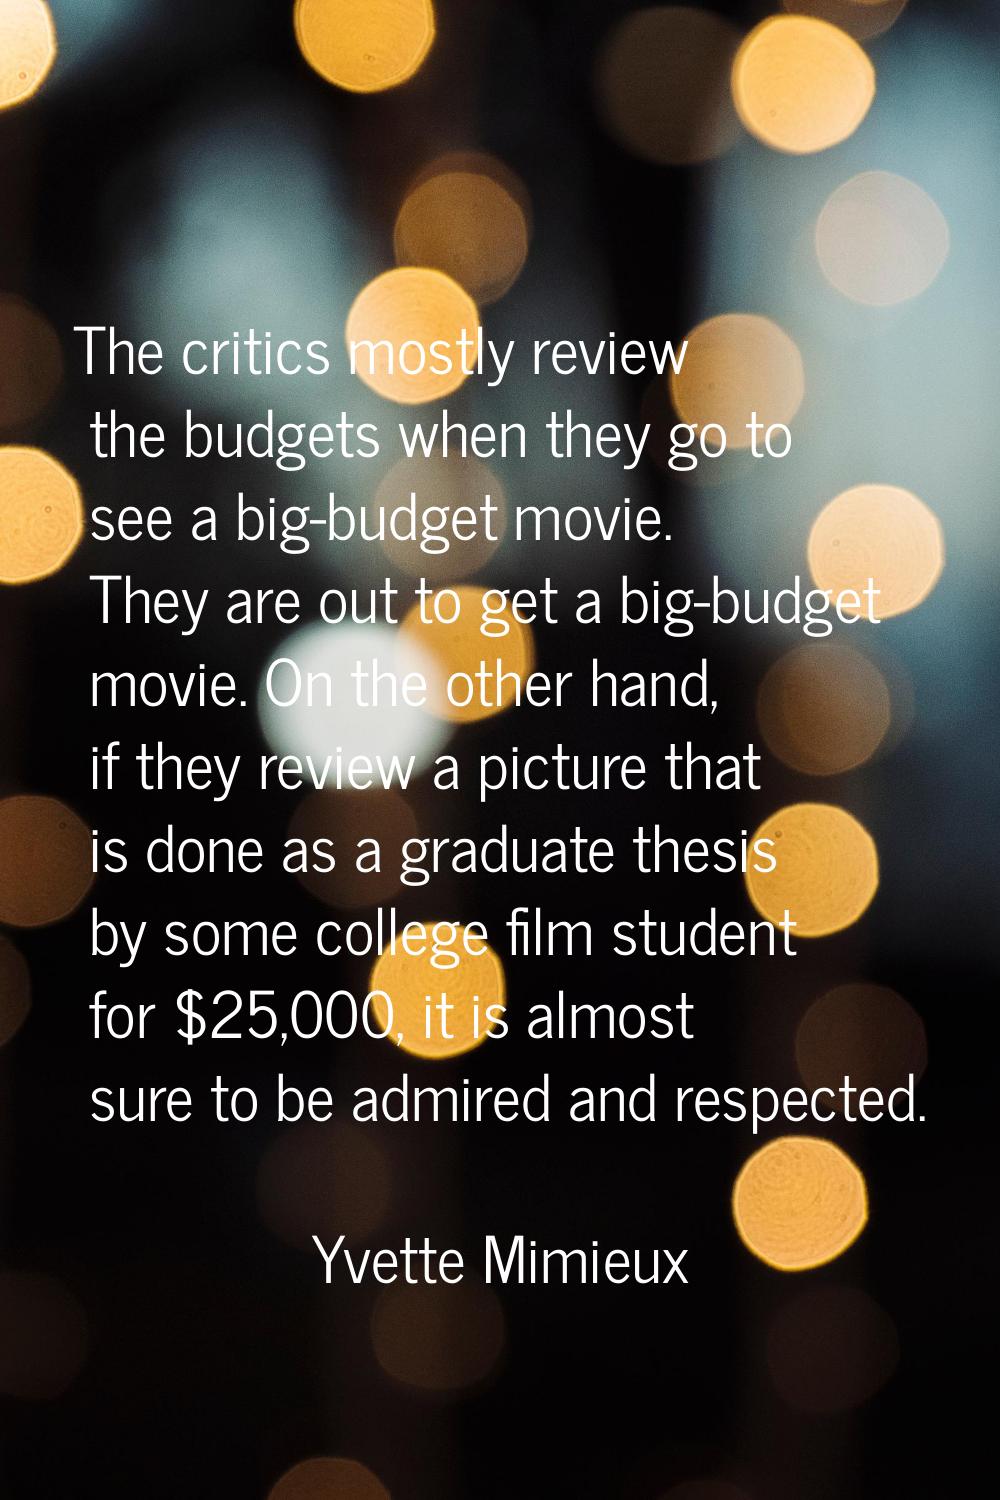 The critics mostly review the budgets when they go to see a big-budget movie. They are out to get a